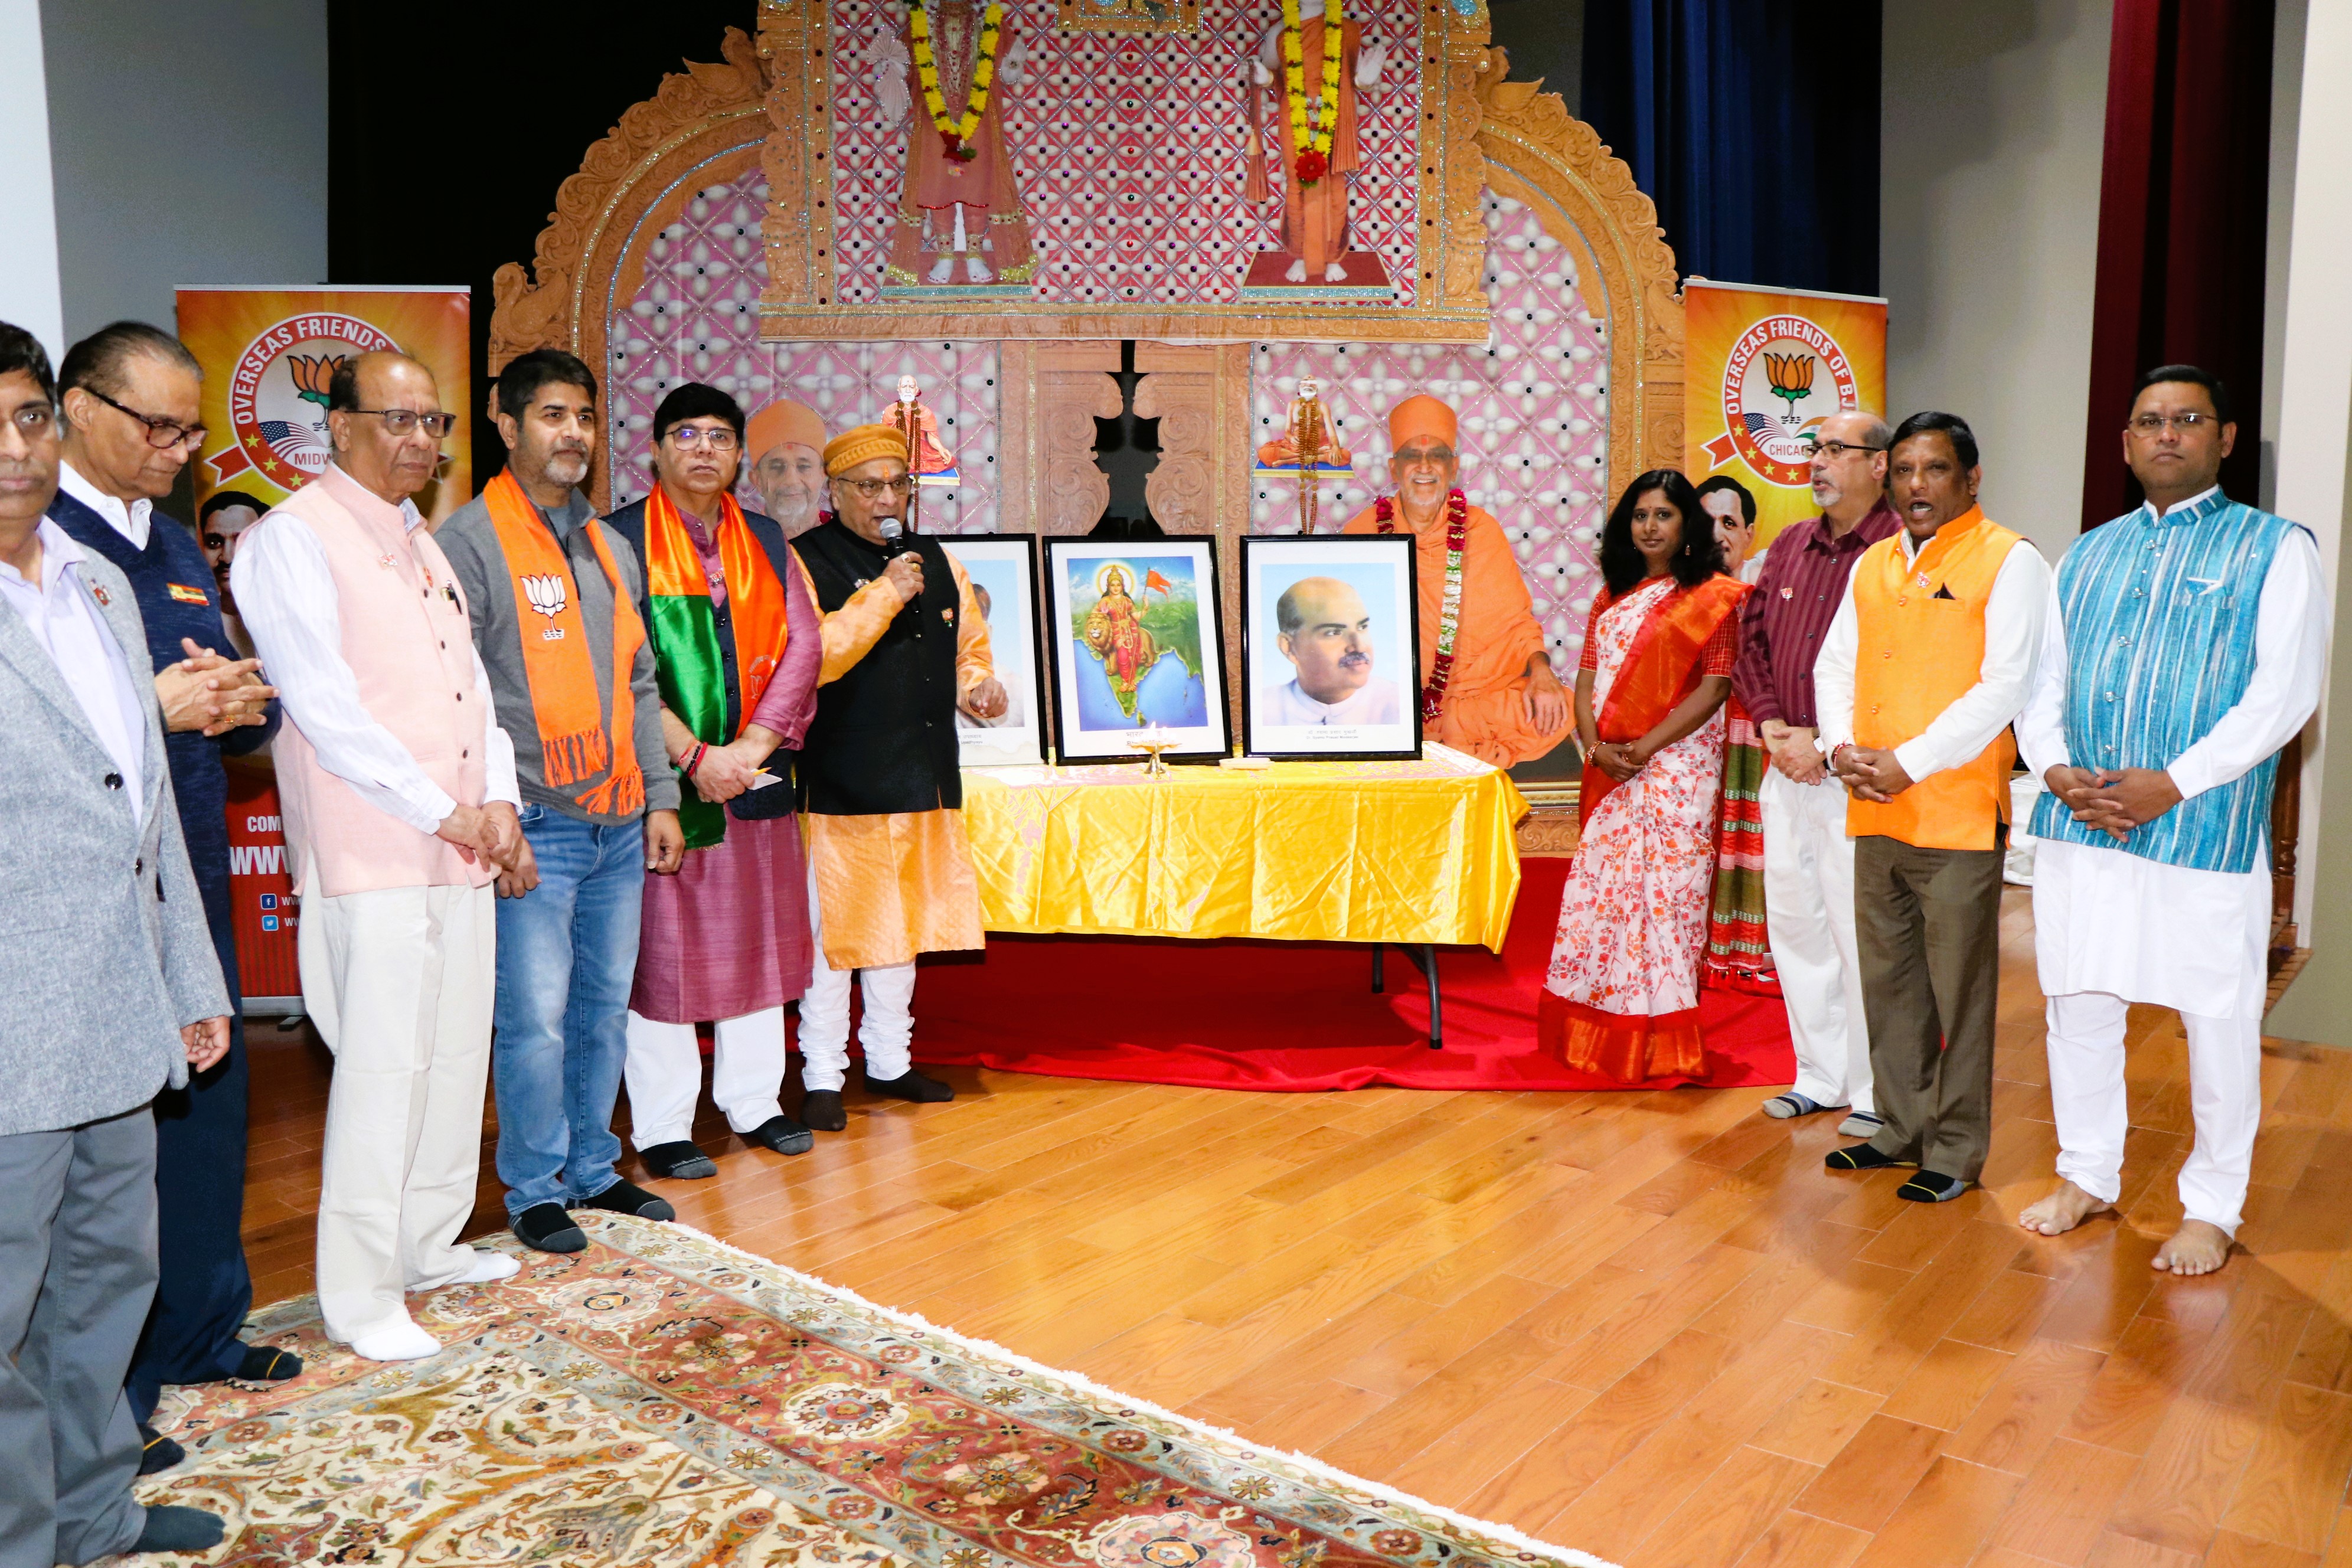 OFBJP – Chicago chapter kicks off Indian election campaign with “Ab Ki Bar 400 Par” meet